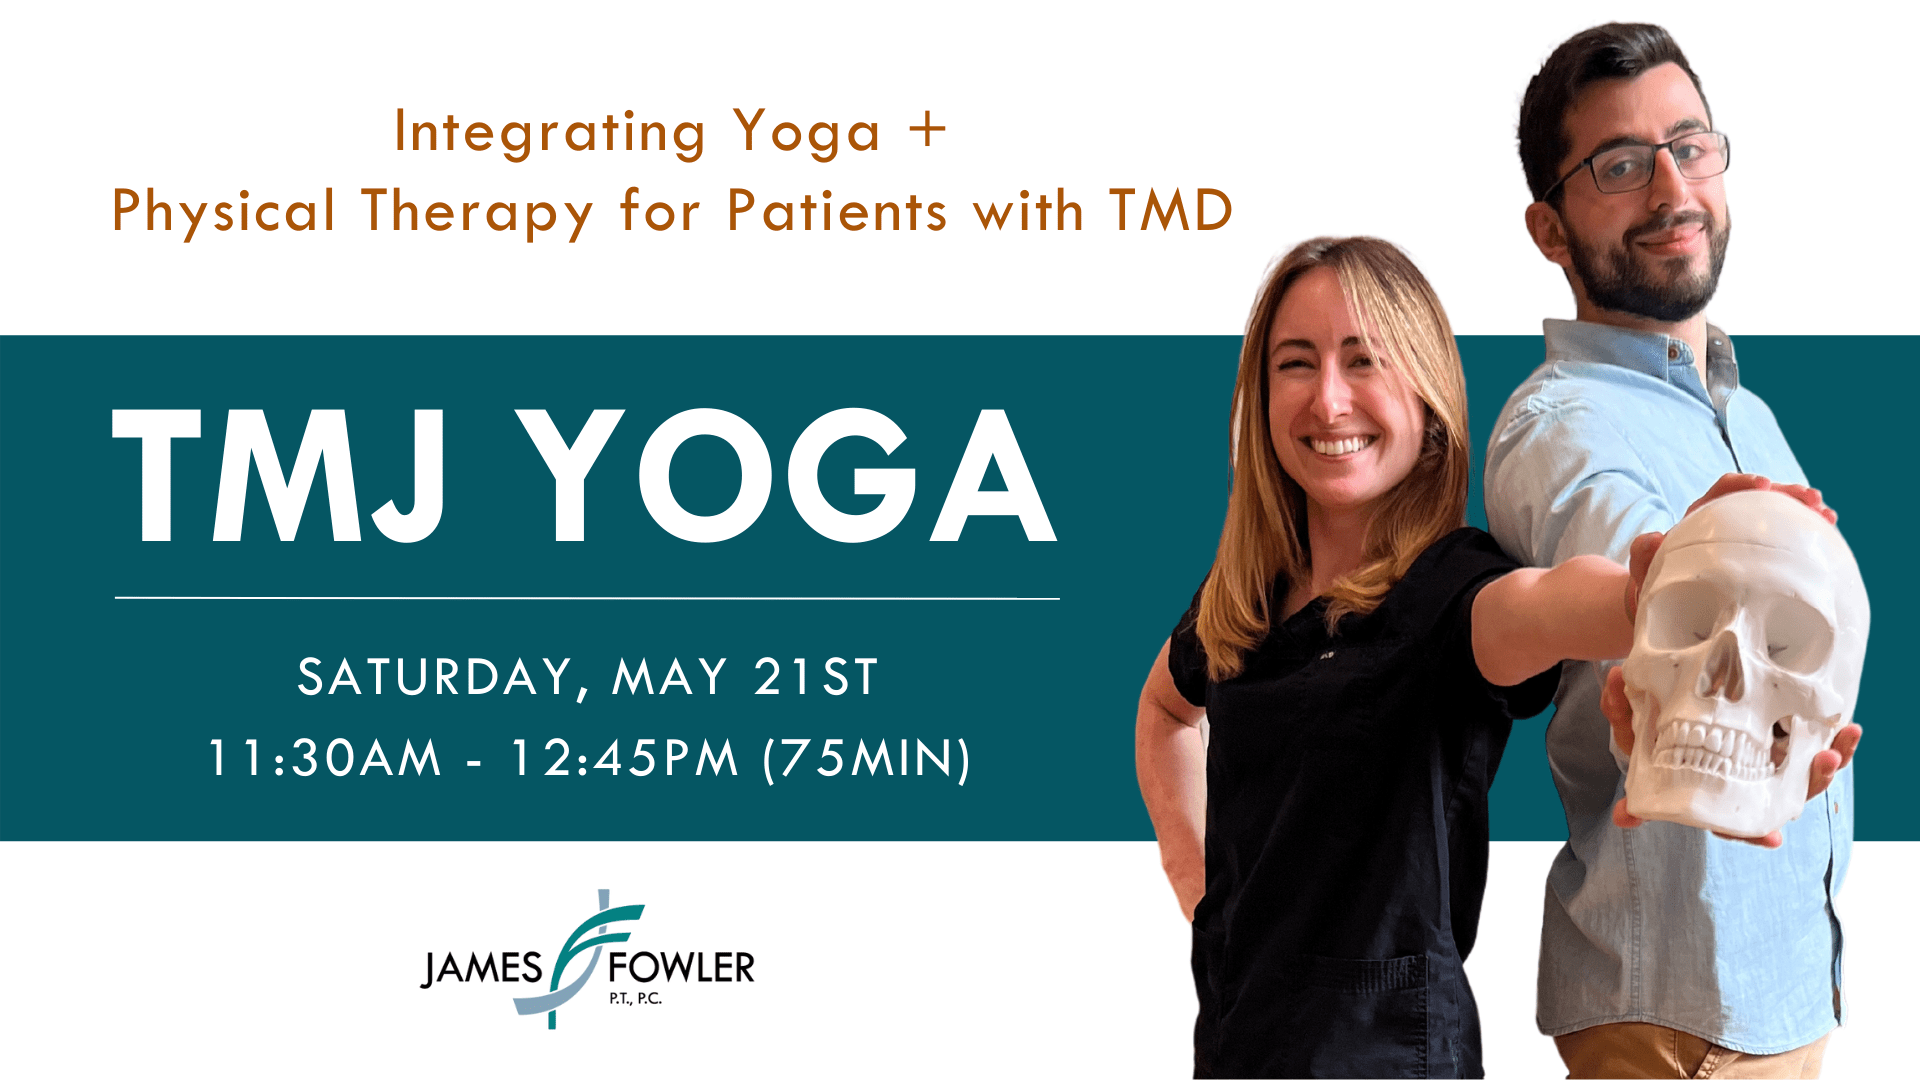 TMJ Yoga James Fowler Physical Therapy